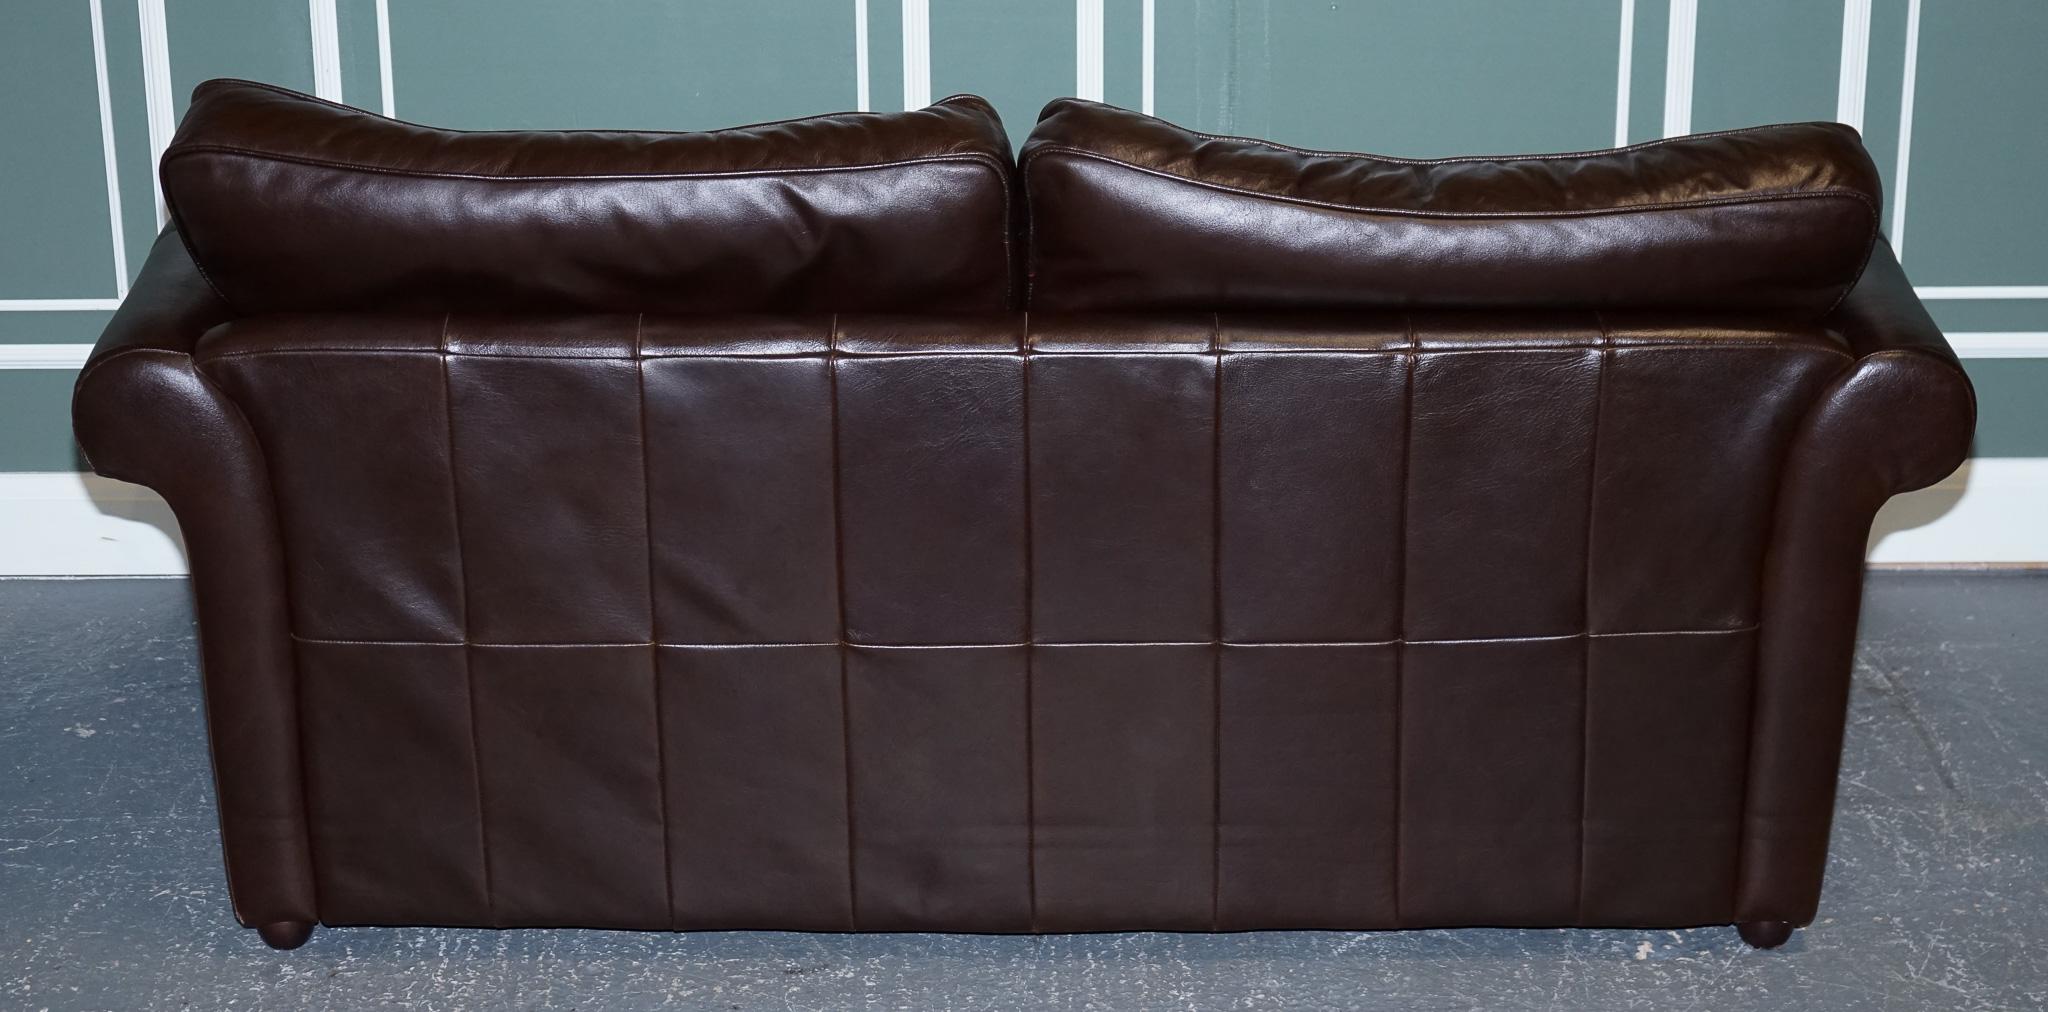 SOFA VINTAGE STUNNiNG CHOCOLATE BROWN LEATHER 2 TO 3 SEATER en vente 7